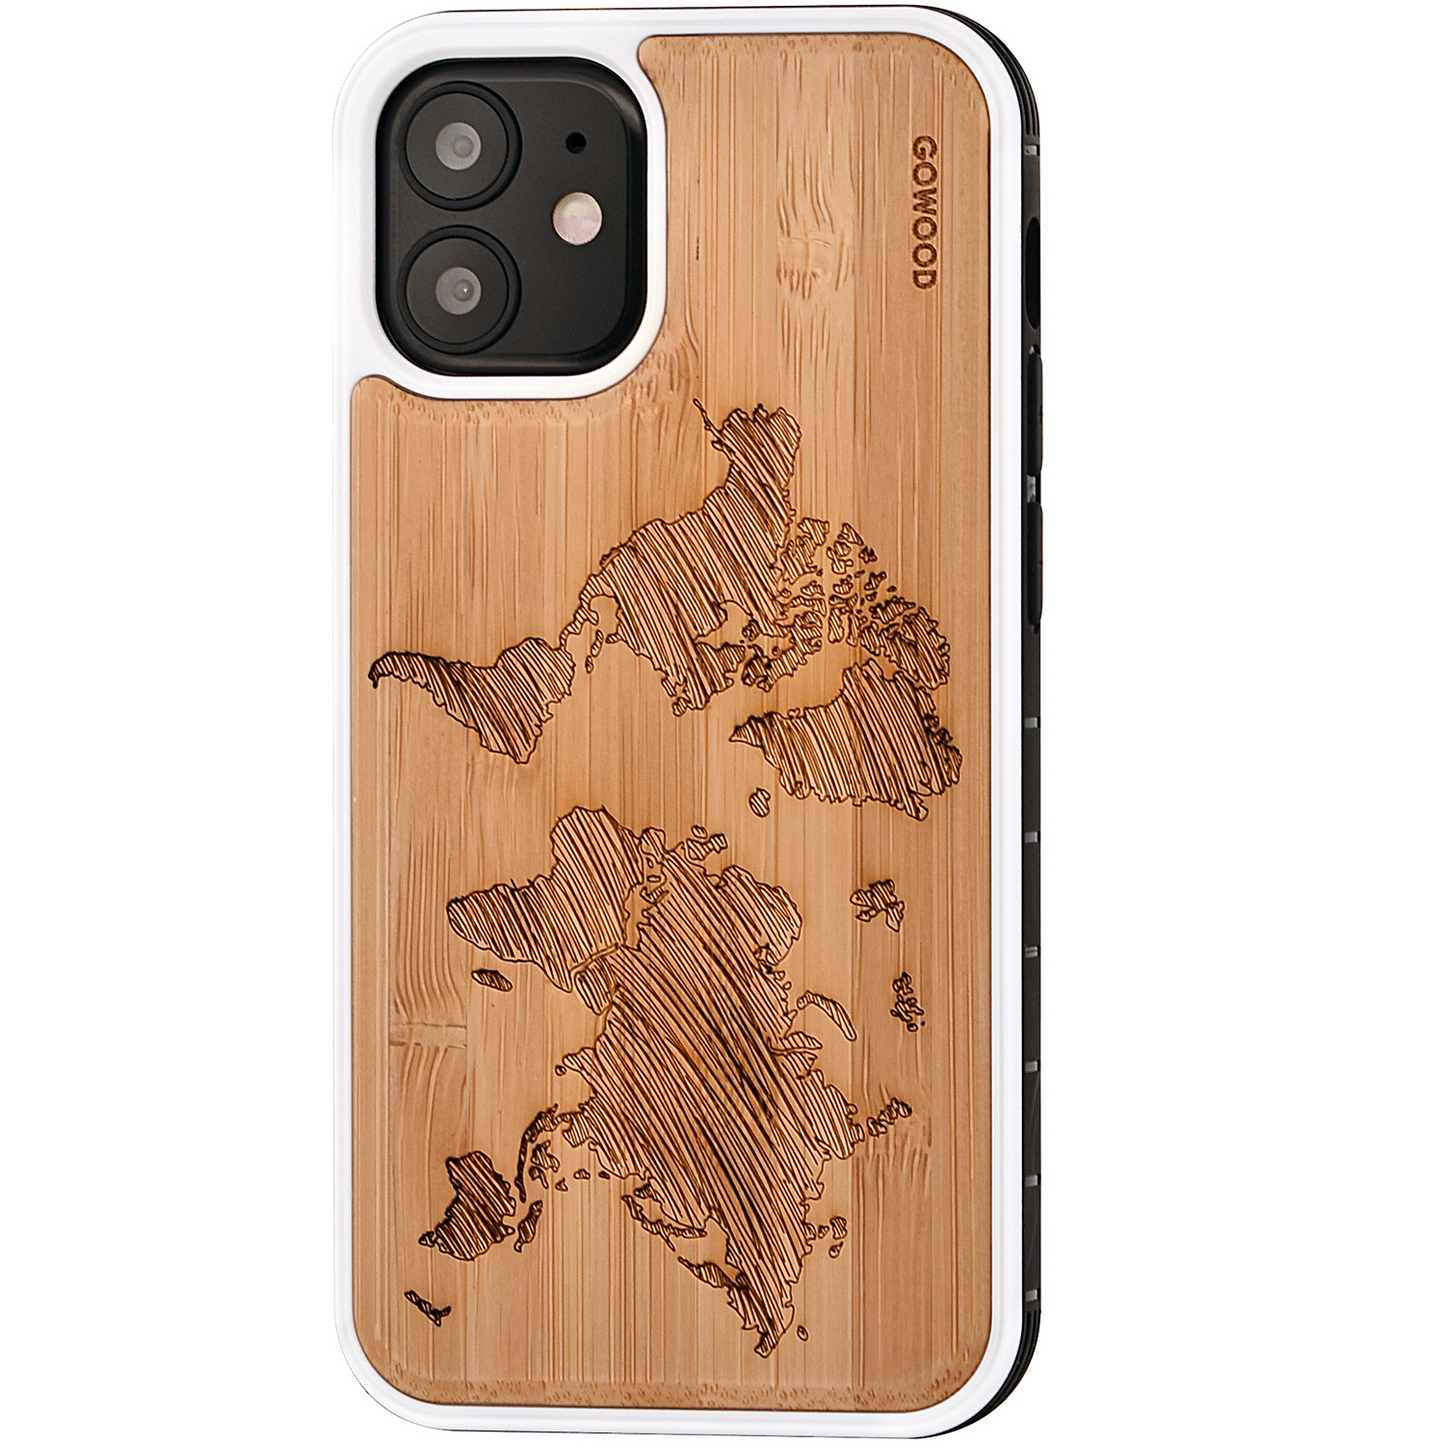 iPhone 12 Mini wood case world map engraved bamboo backside with TPU bumper